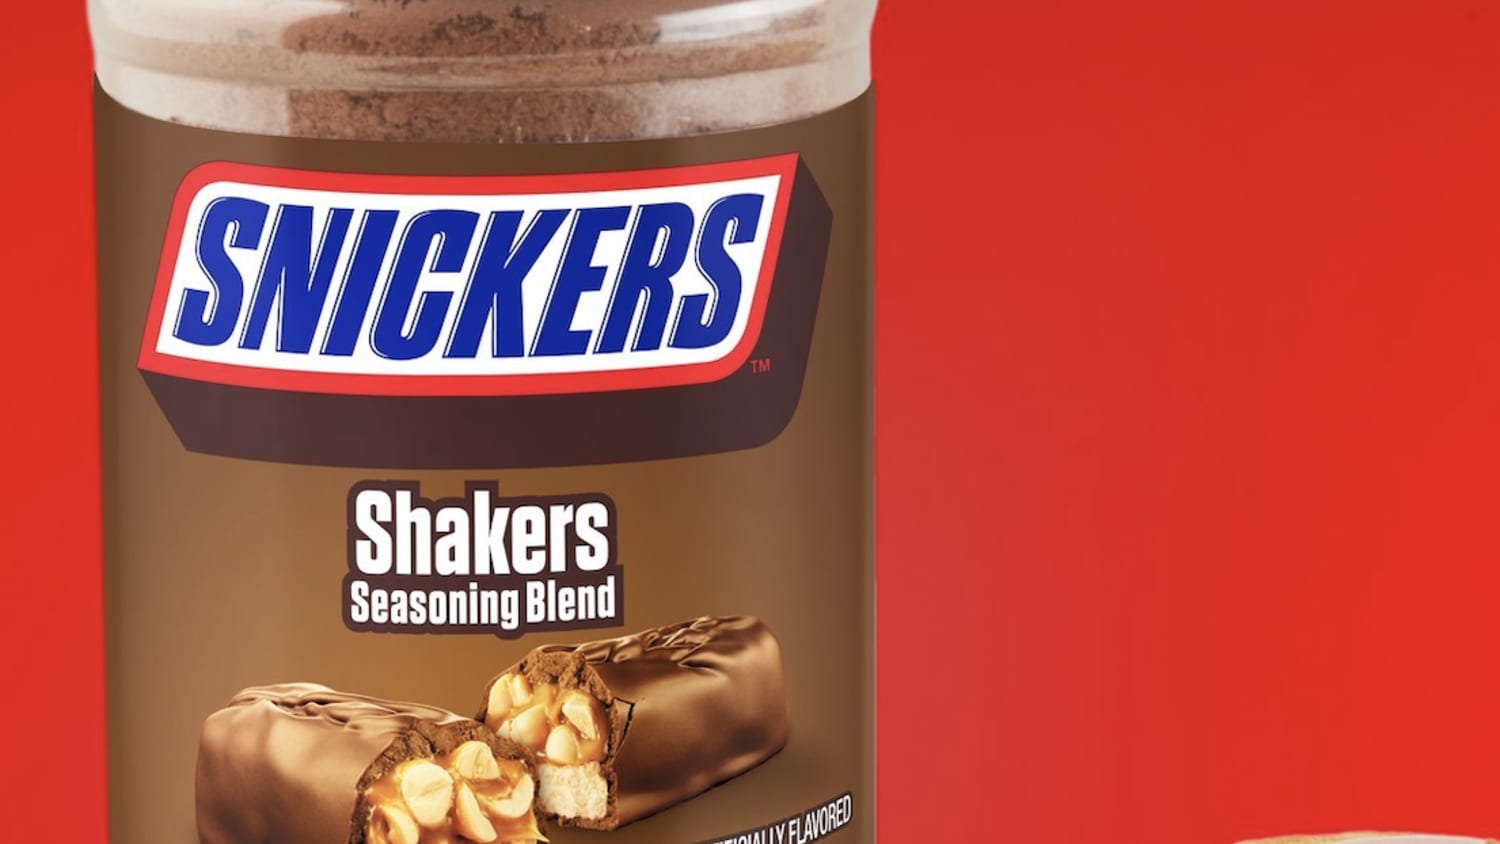 Snickers Shakers Seasoning Blend Review 